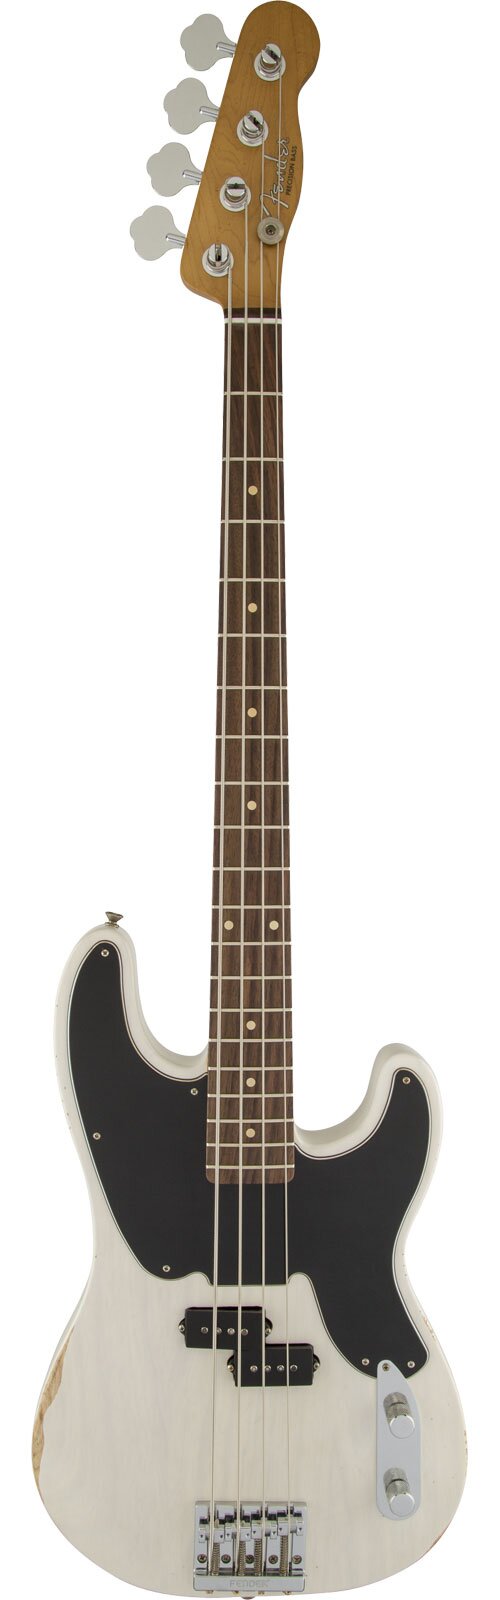 Fender Mike Dirnt Road Worn Precision Bass Rosewood Fingerboard White Blonde : photo 1